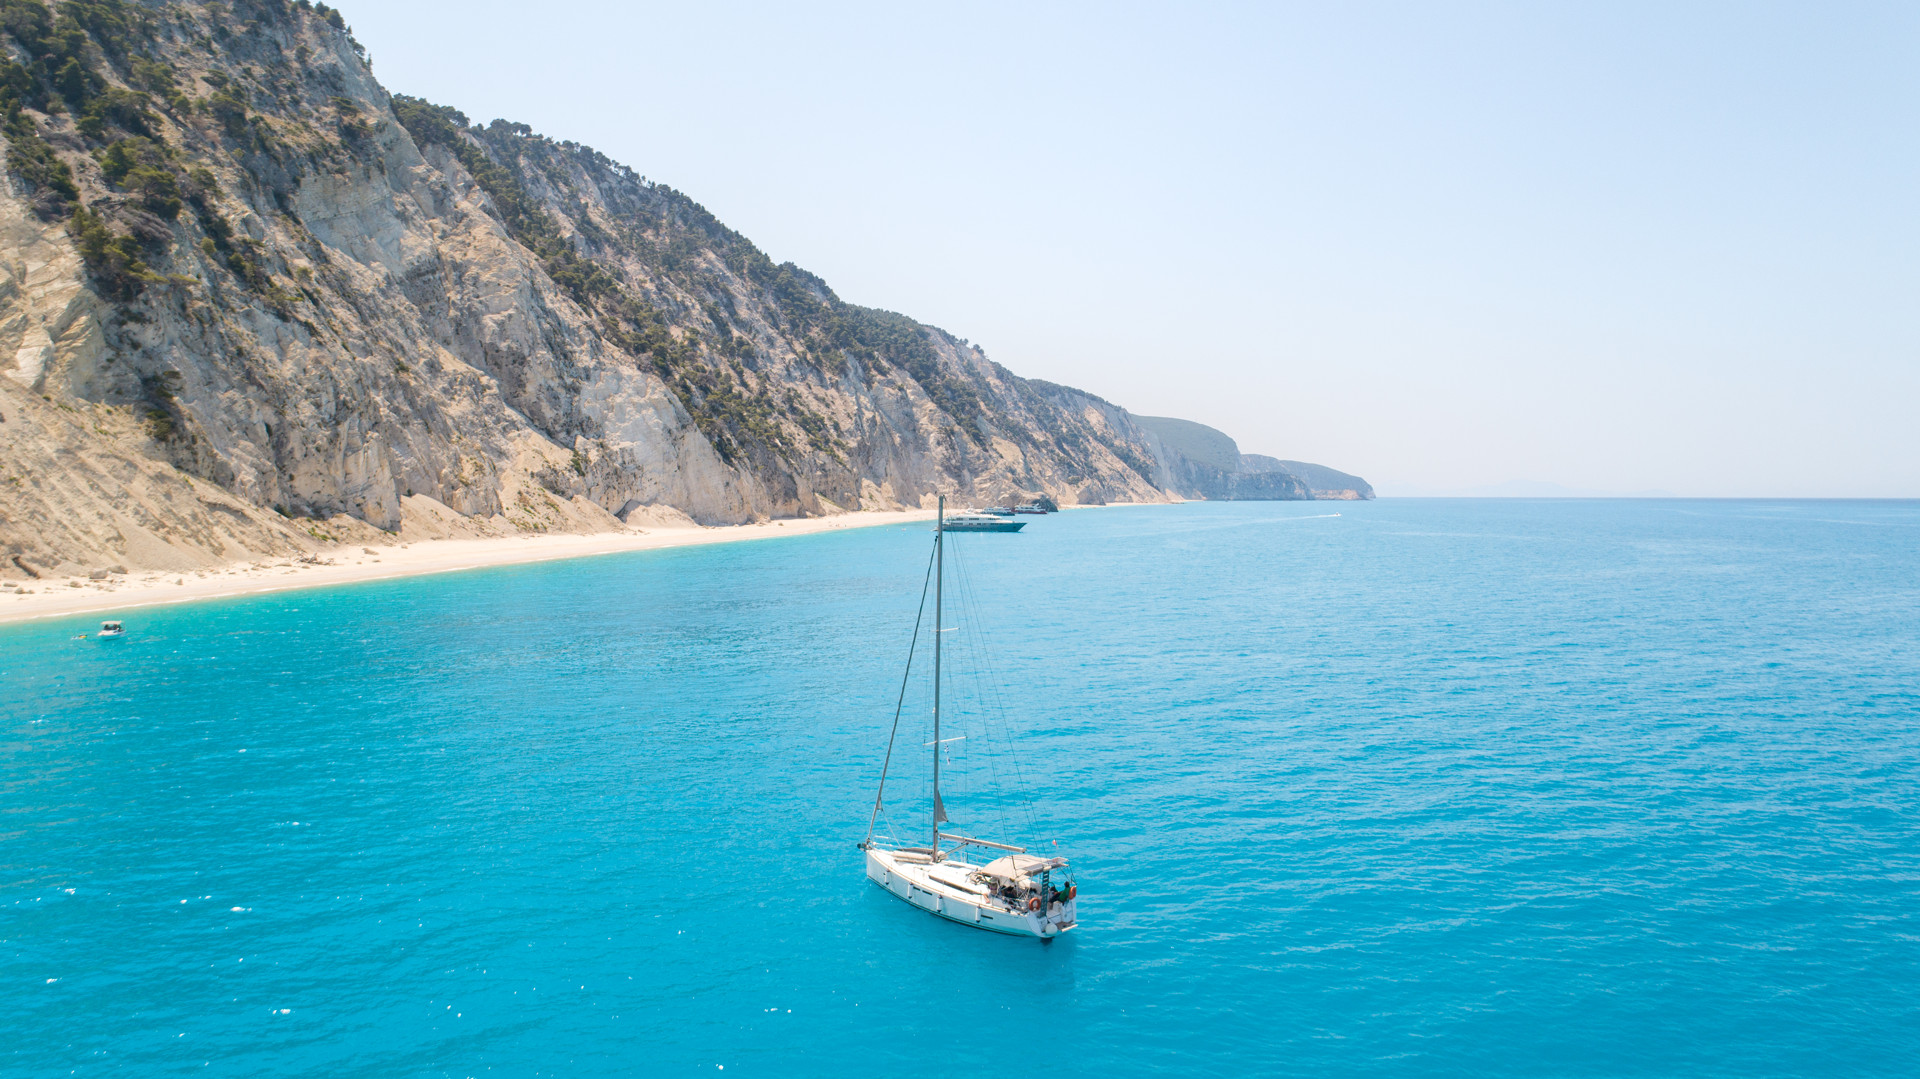 You walk down 400 steps to get to Egremni beach in Lefkada … unless you arrive by boat